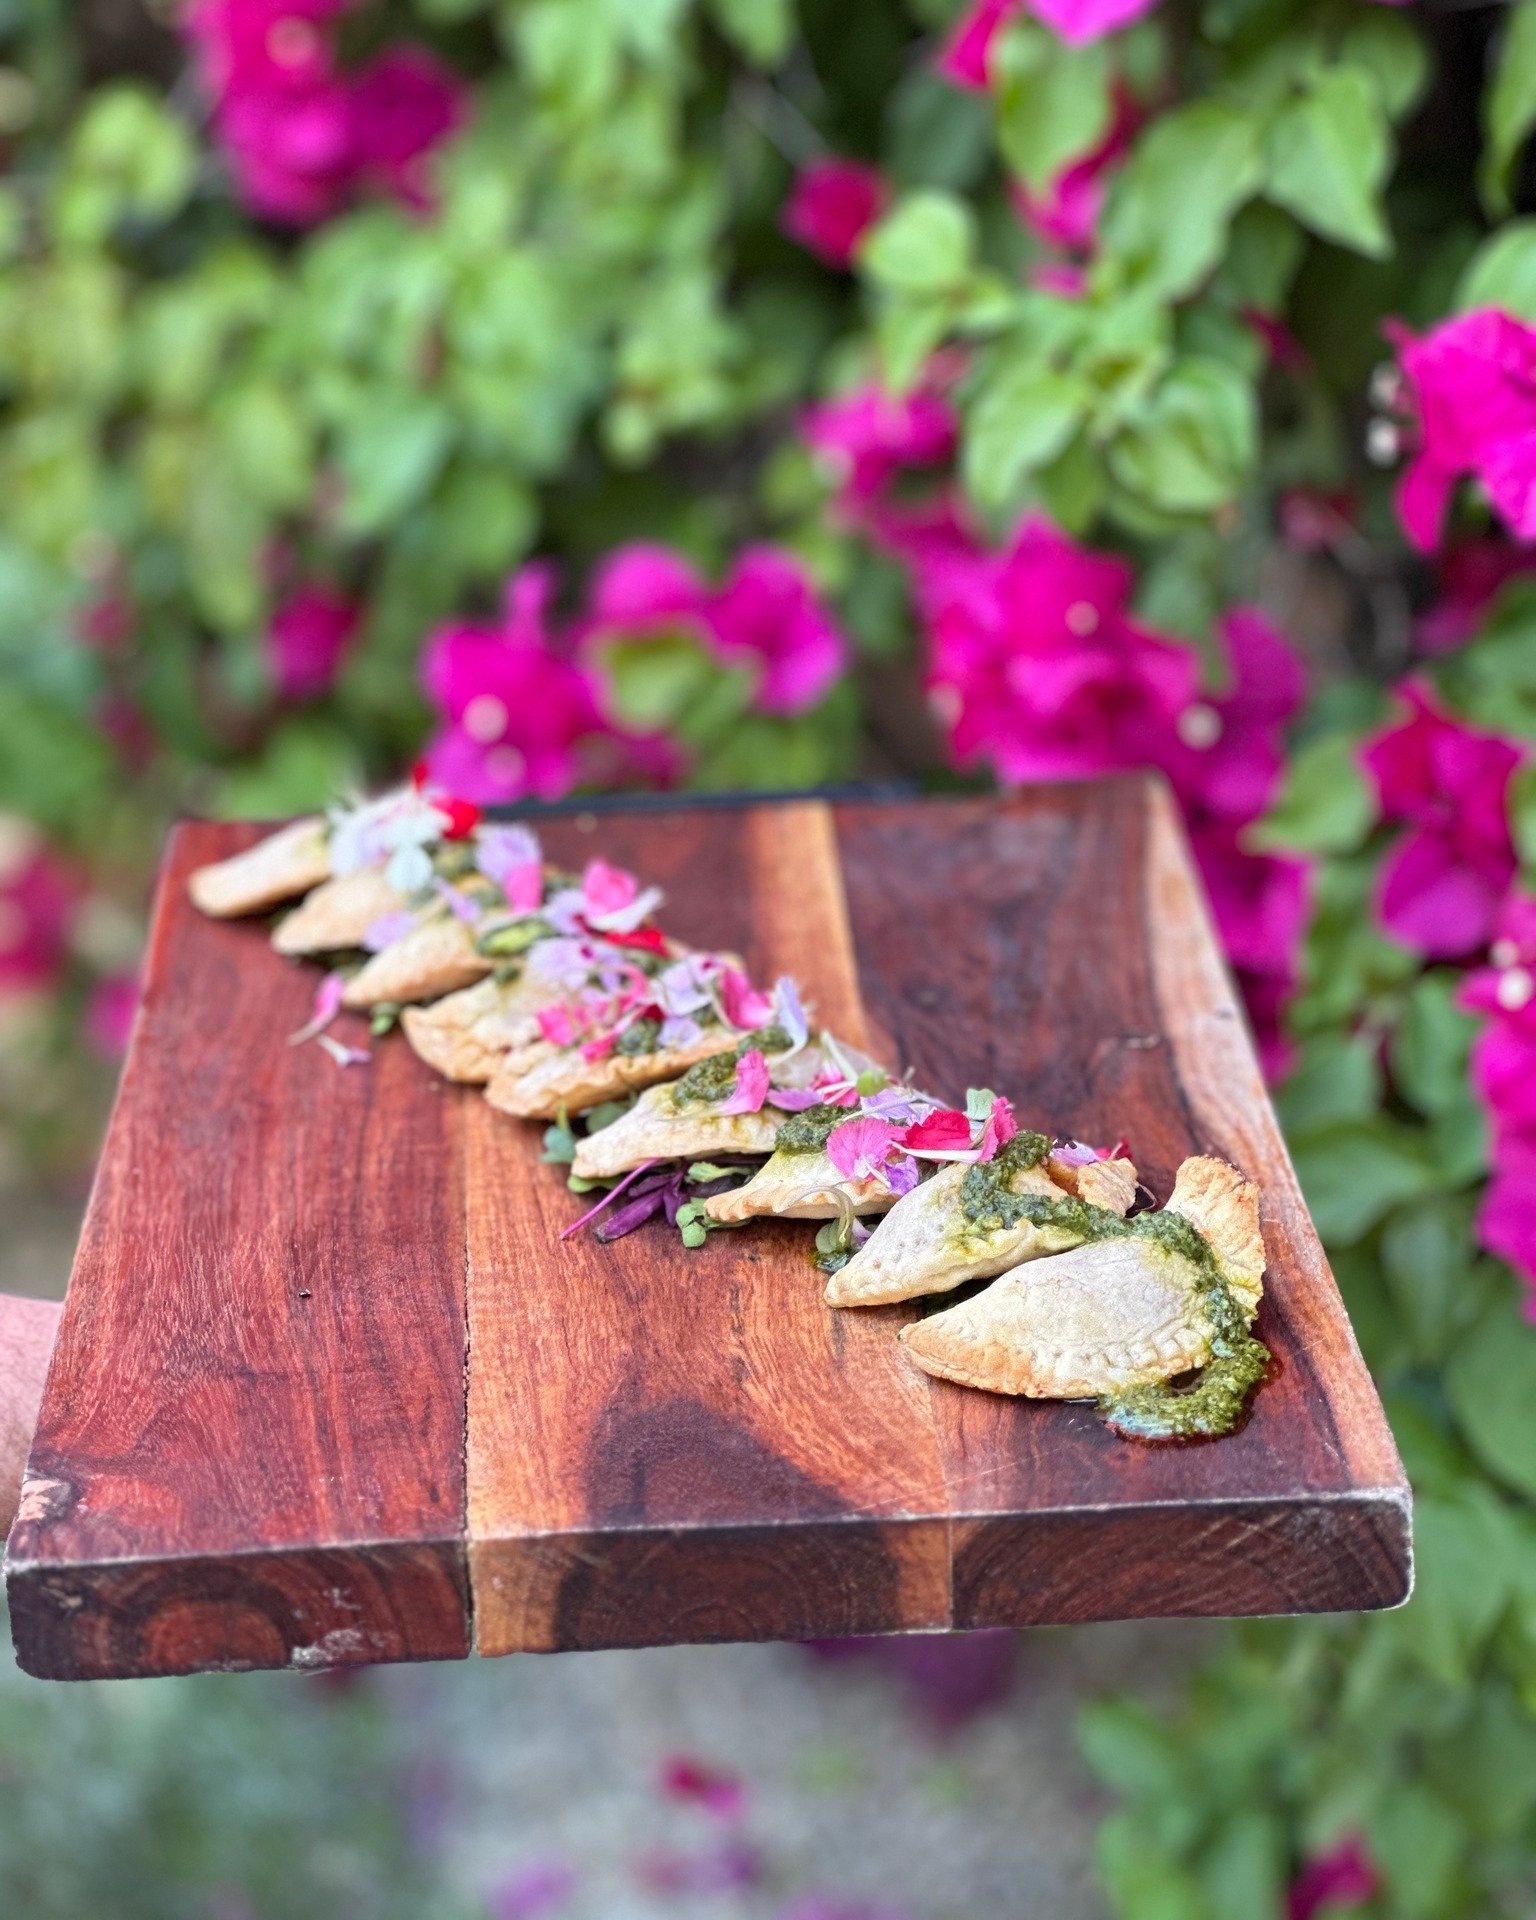 Let's start the party off right! 🎉 Appetizers are more than just finger food, they set the tone for the entire event. Our team crafts bold-flavored bites that will tantalize your taste buds and leave your guests wanting more.

Comment the word APPET